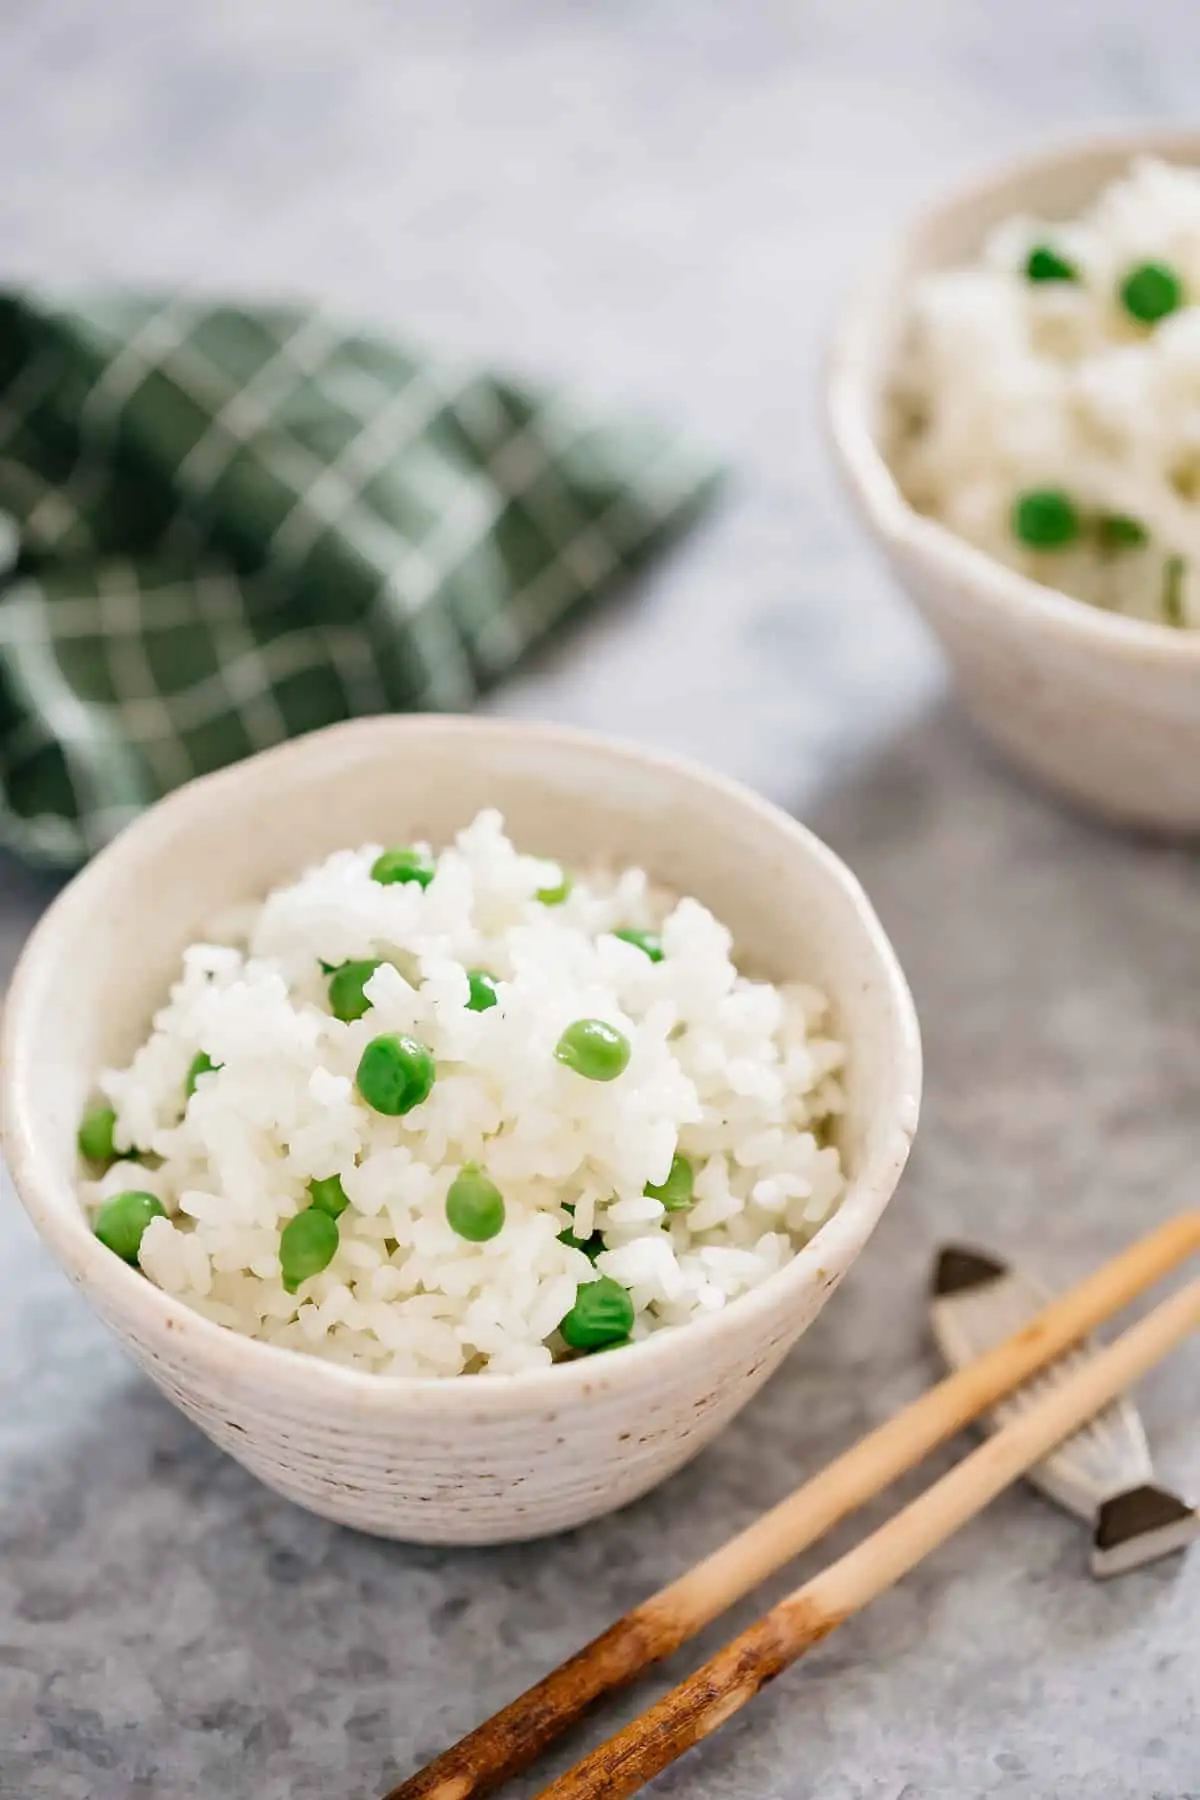 green peas and rice served in a Japanese bowl.